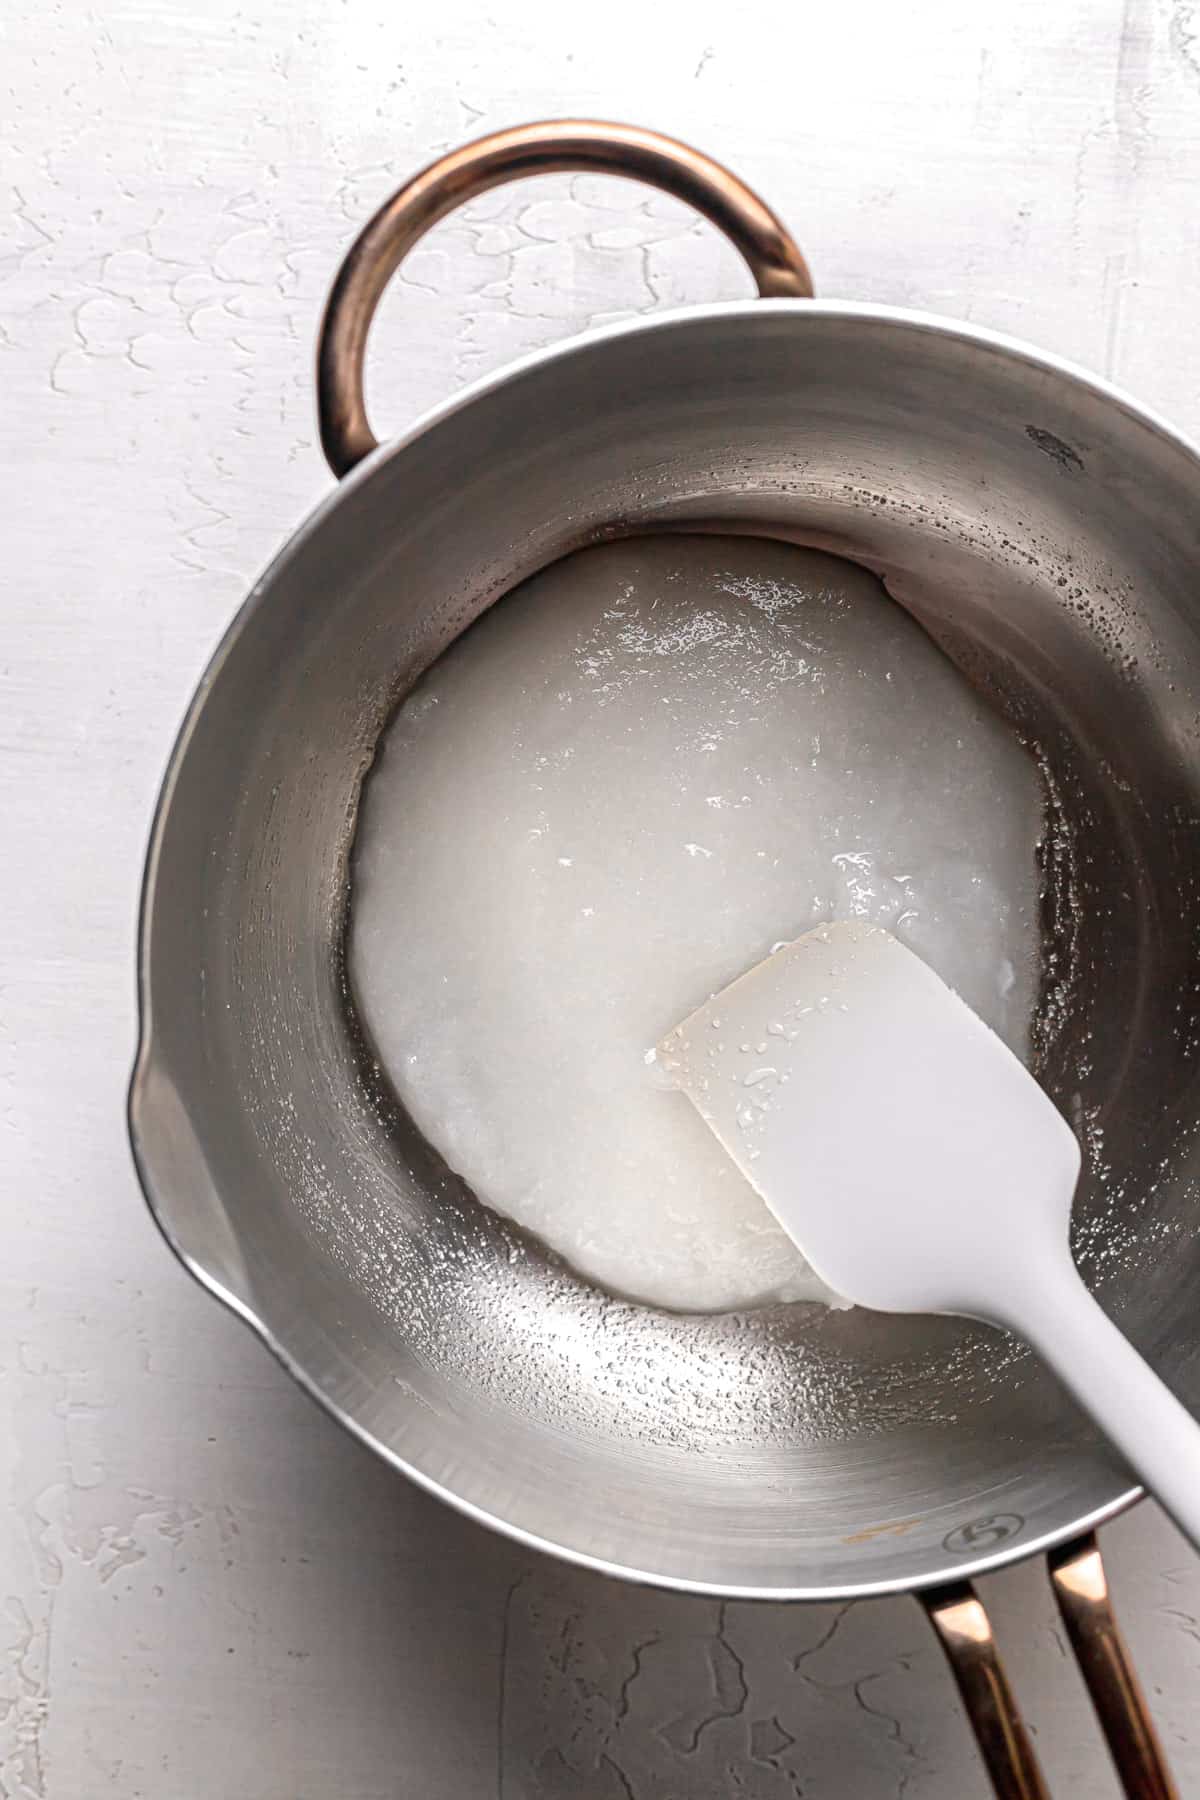 water fully mixed into into sugar mixture in saucepan